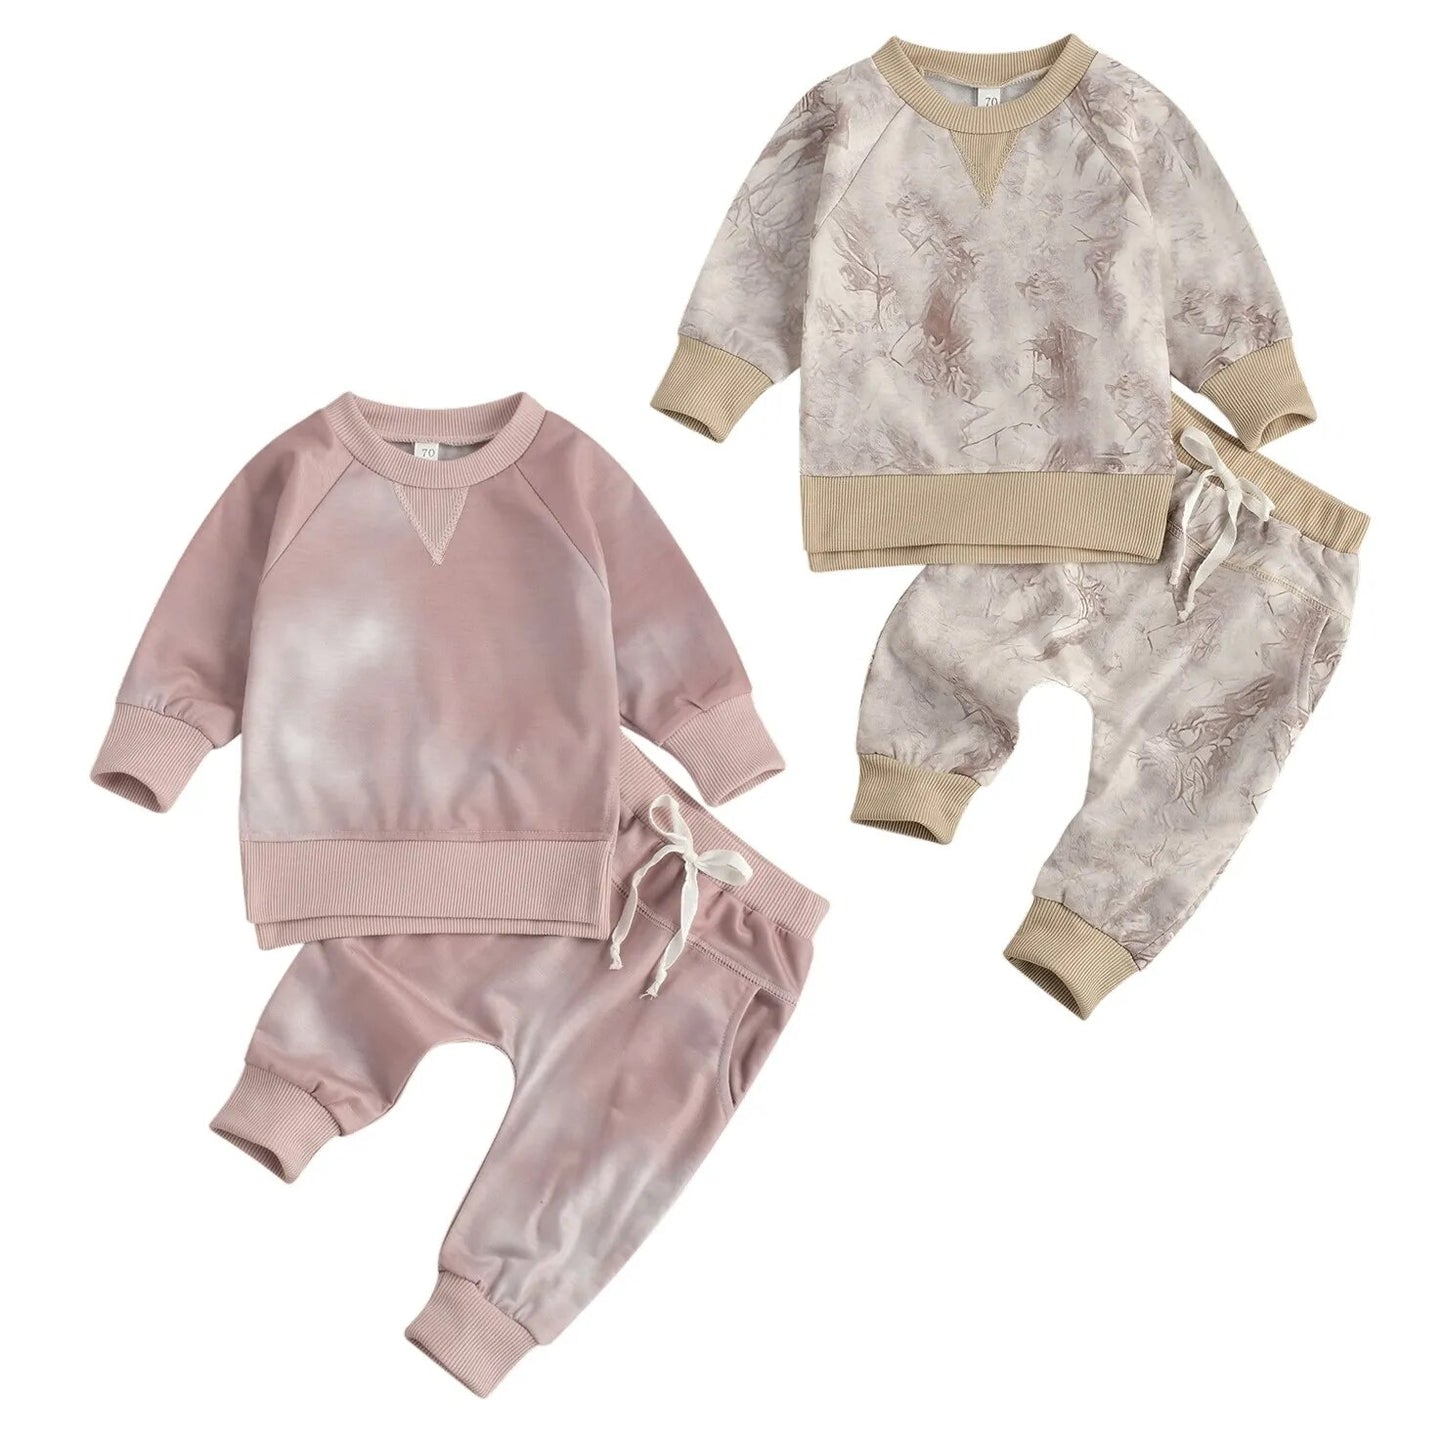 2 Pcs Newborn Baby Girls Boys Tie Dye Outfits, Infant Long Sleeve Round Neck Pullover + Tie Up Pants Pockets Spring Autumn